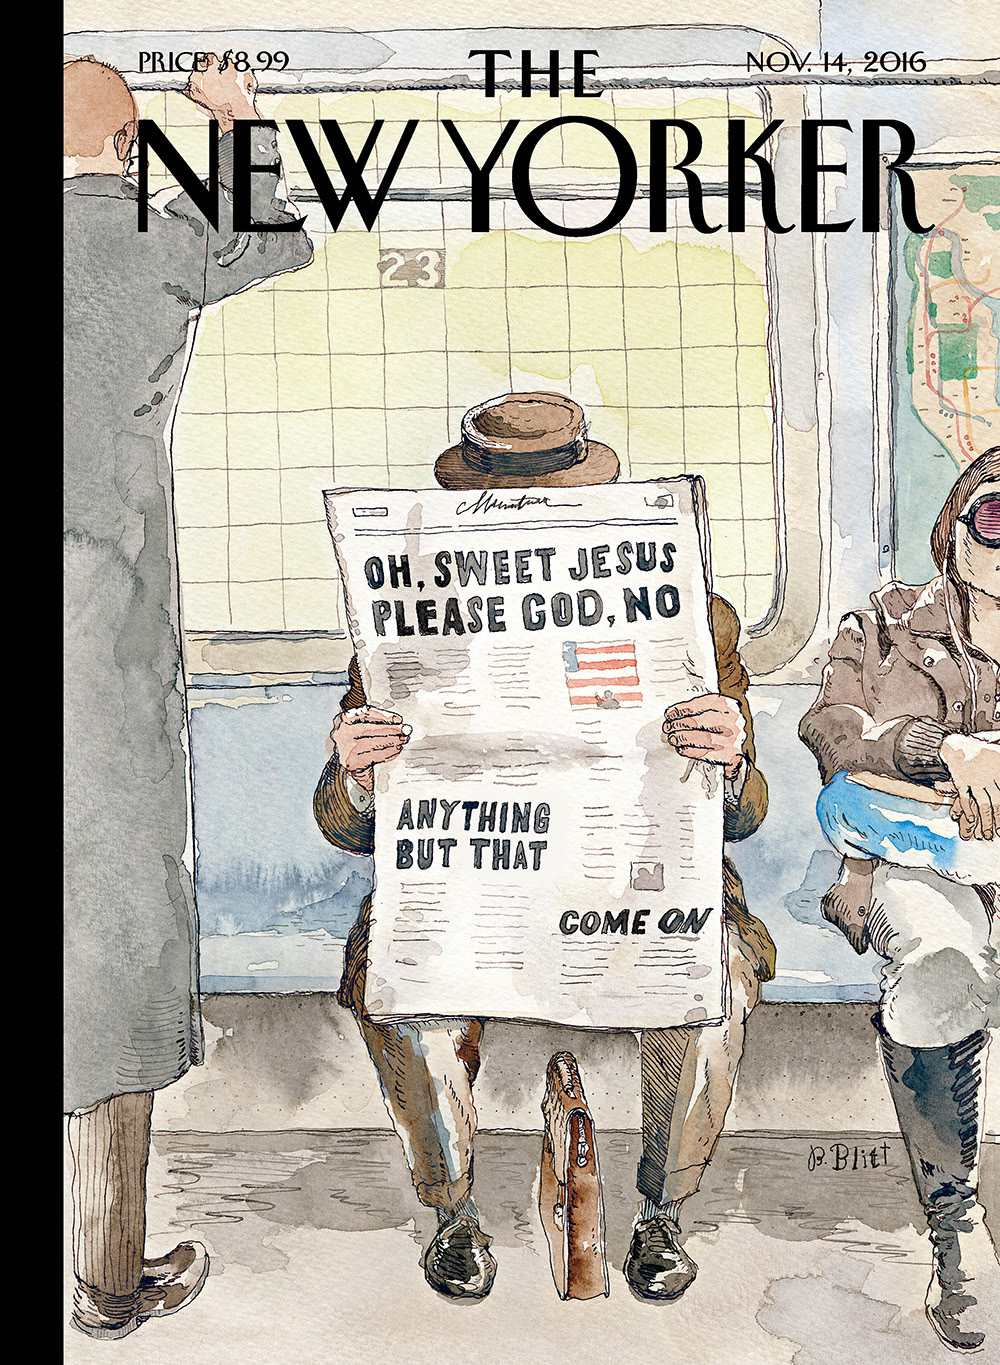 The New Yorker "Anything But That," November 14